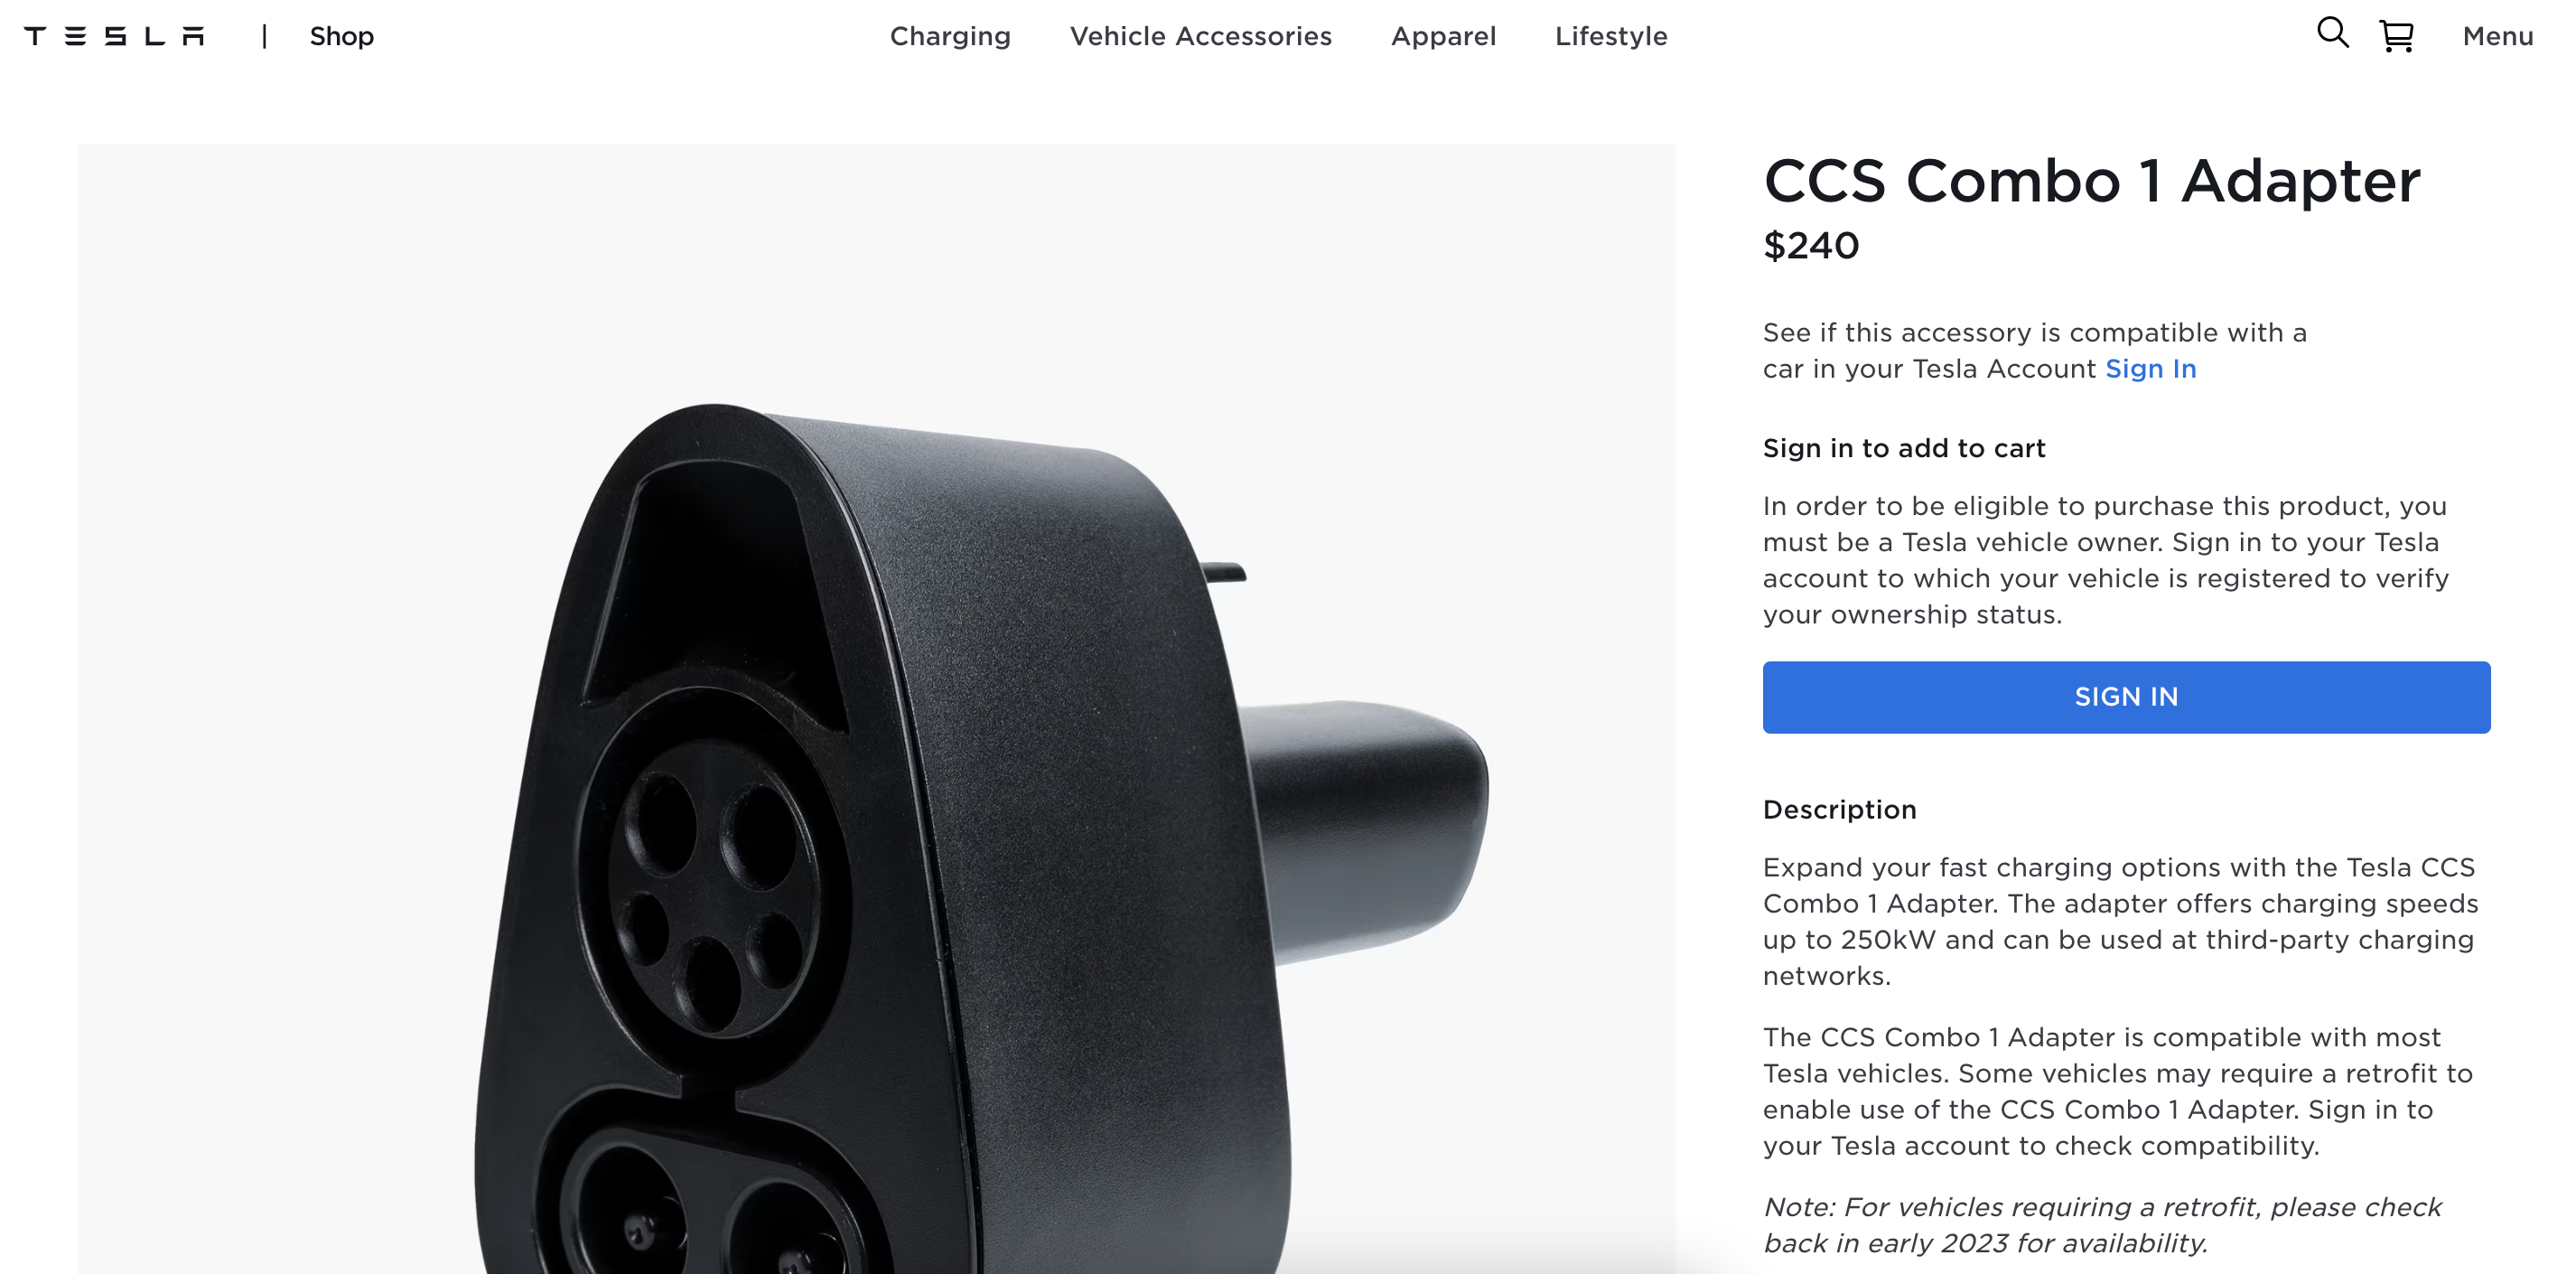 Tesla drops price of CCS adapter by 30% - Drive Tesla